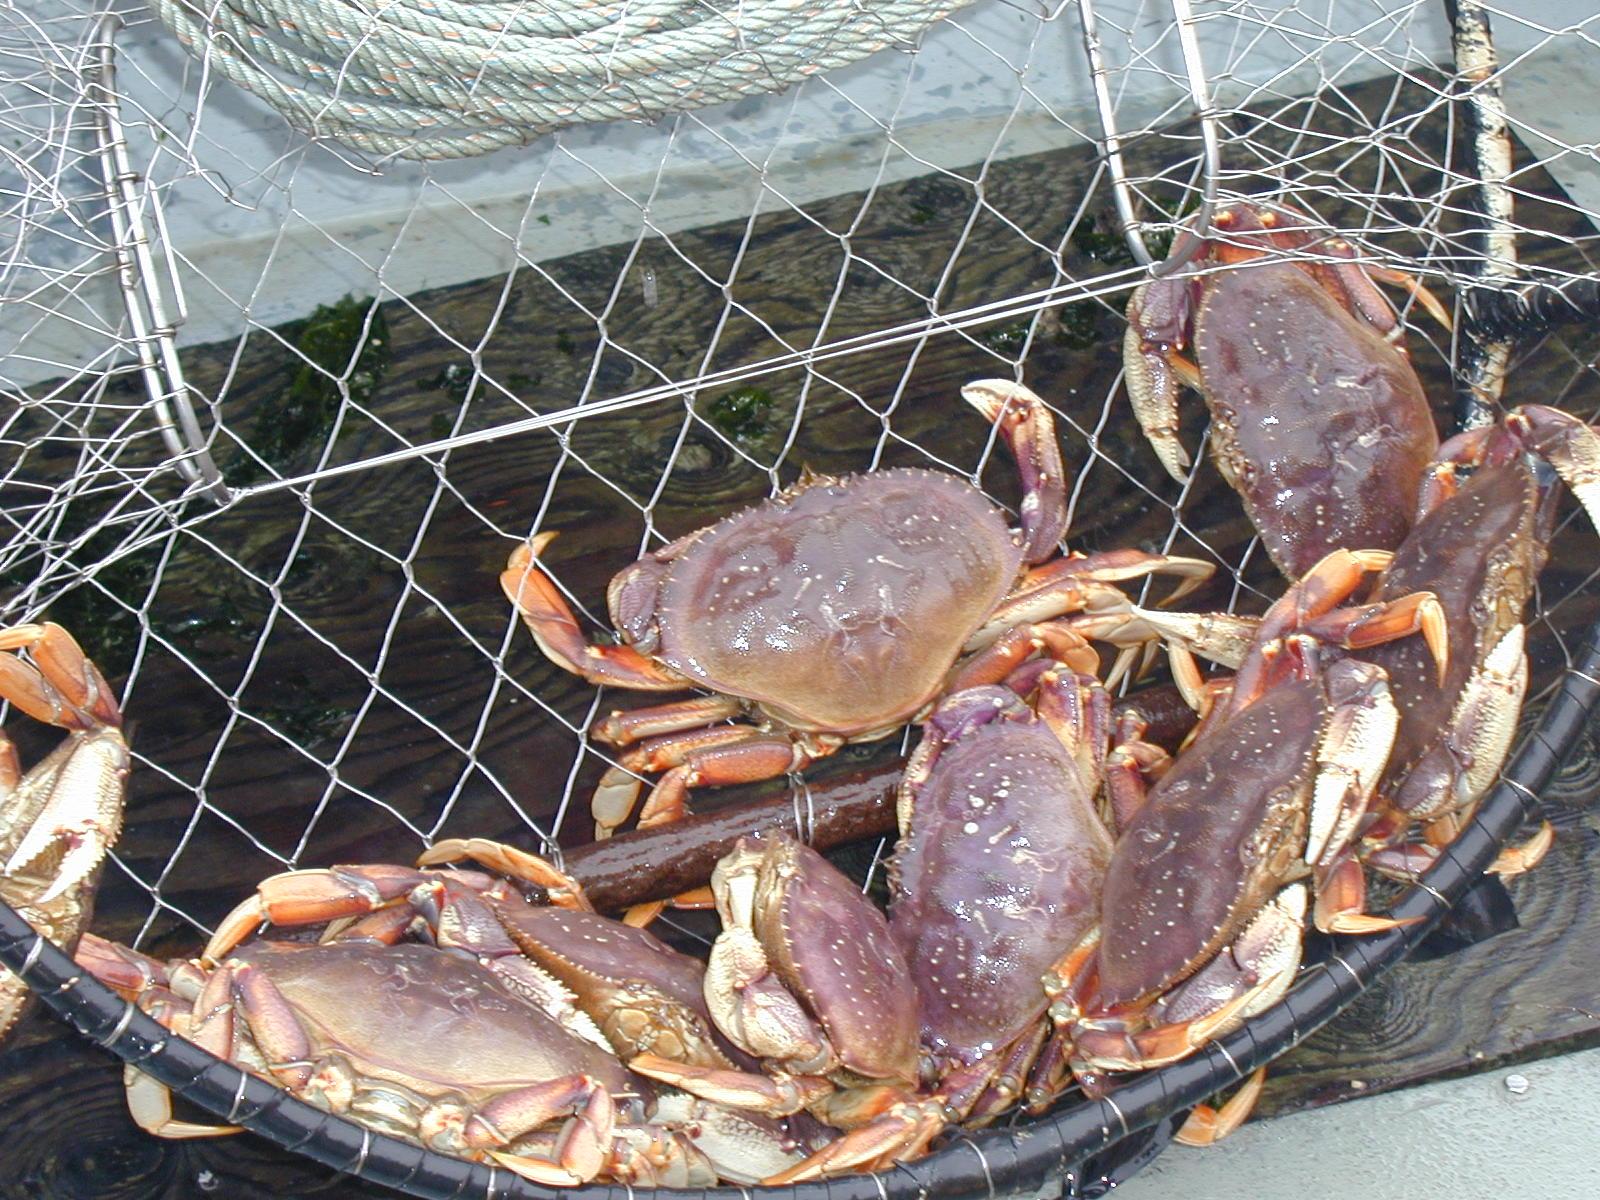 Recreational crabbing to open July 1 for many Puget Sound marine